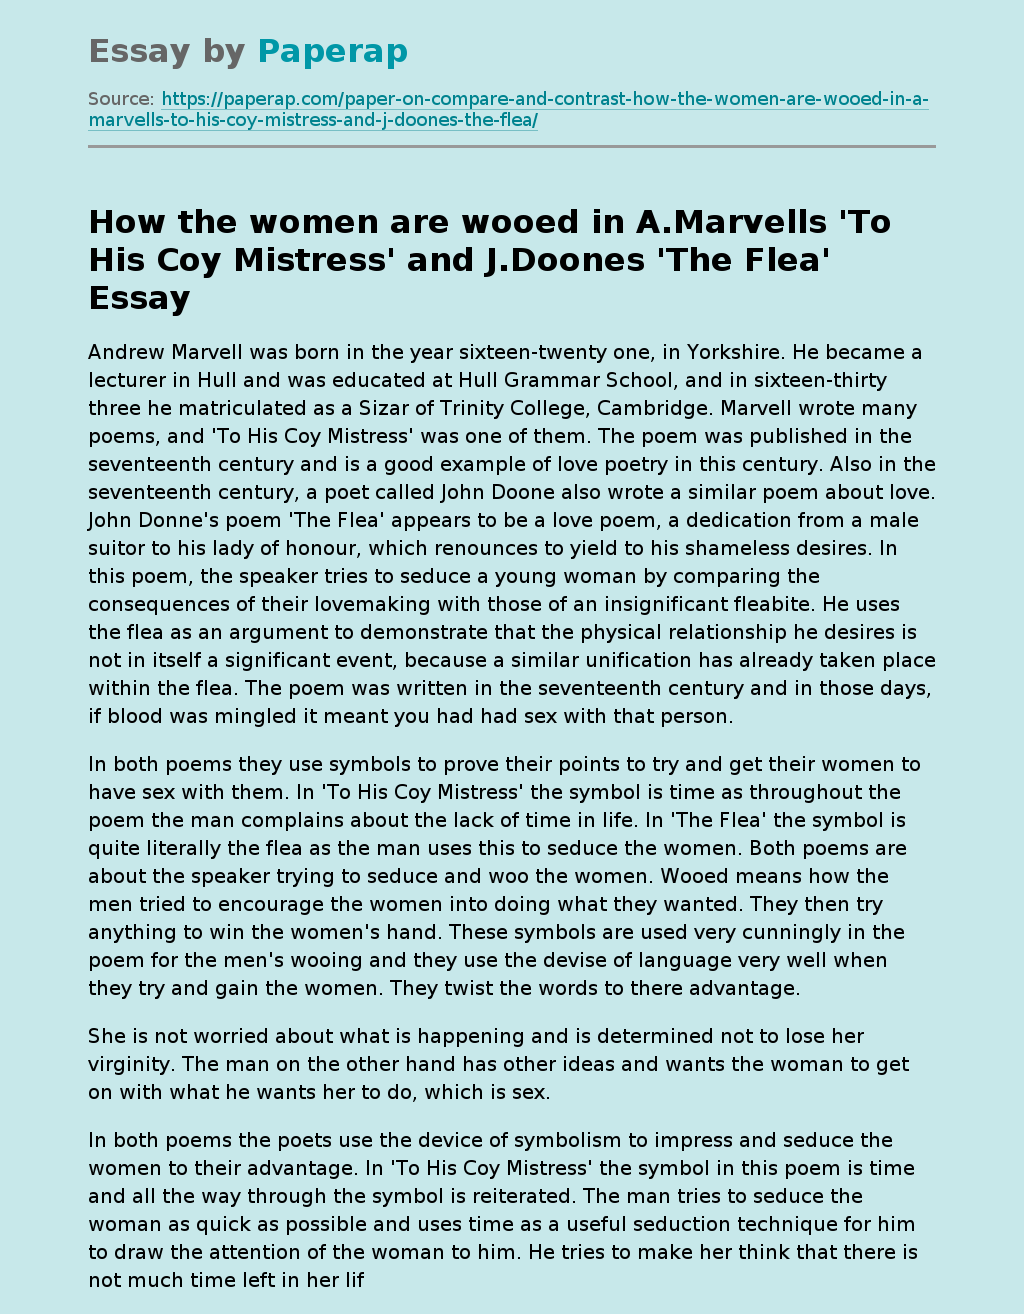 How the women are wooed in A.Marvells 'To His Coy Mistress' and J.Doones 'The Flea'